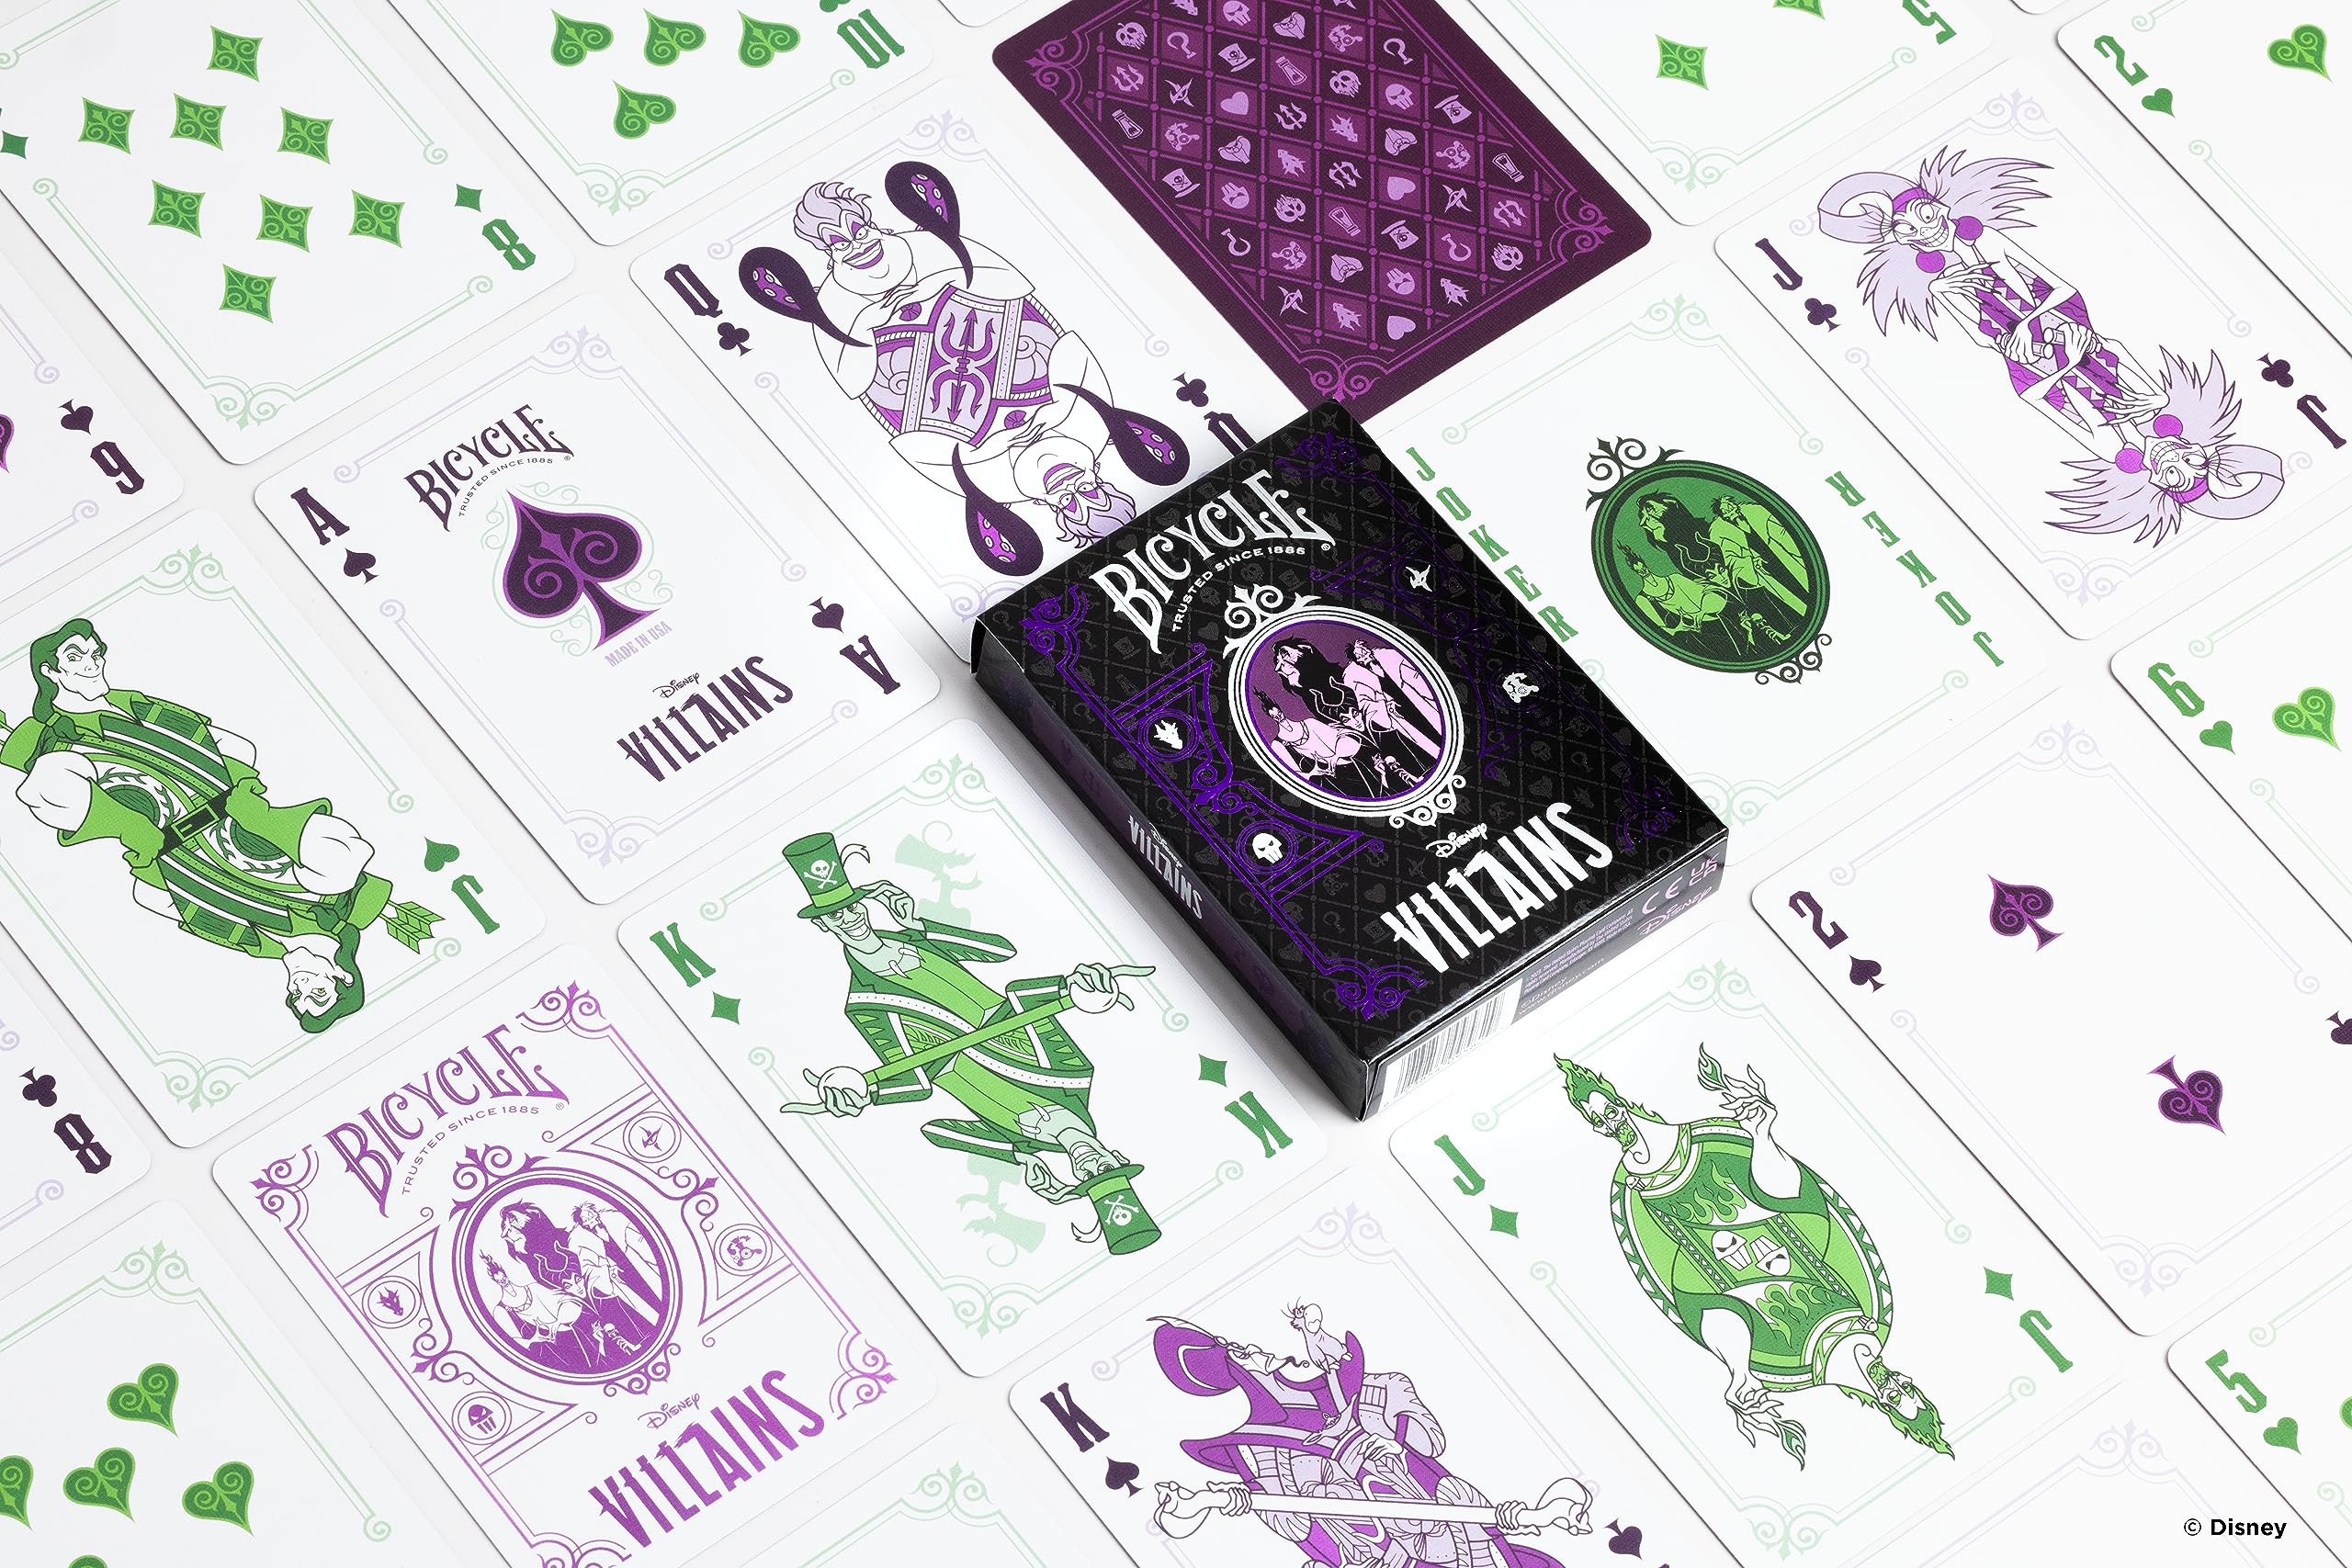 Bicycle Disney Villains Playing Cards - Features 12 Disney Villains Including Scar, Maleficent, Ursula, and More - Green or Purple Playing Cards (Colors May Vary)